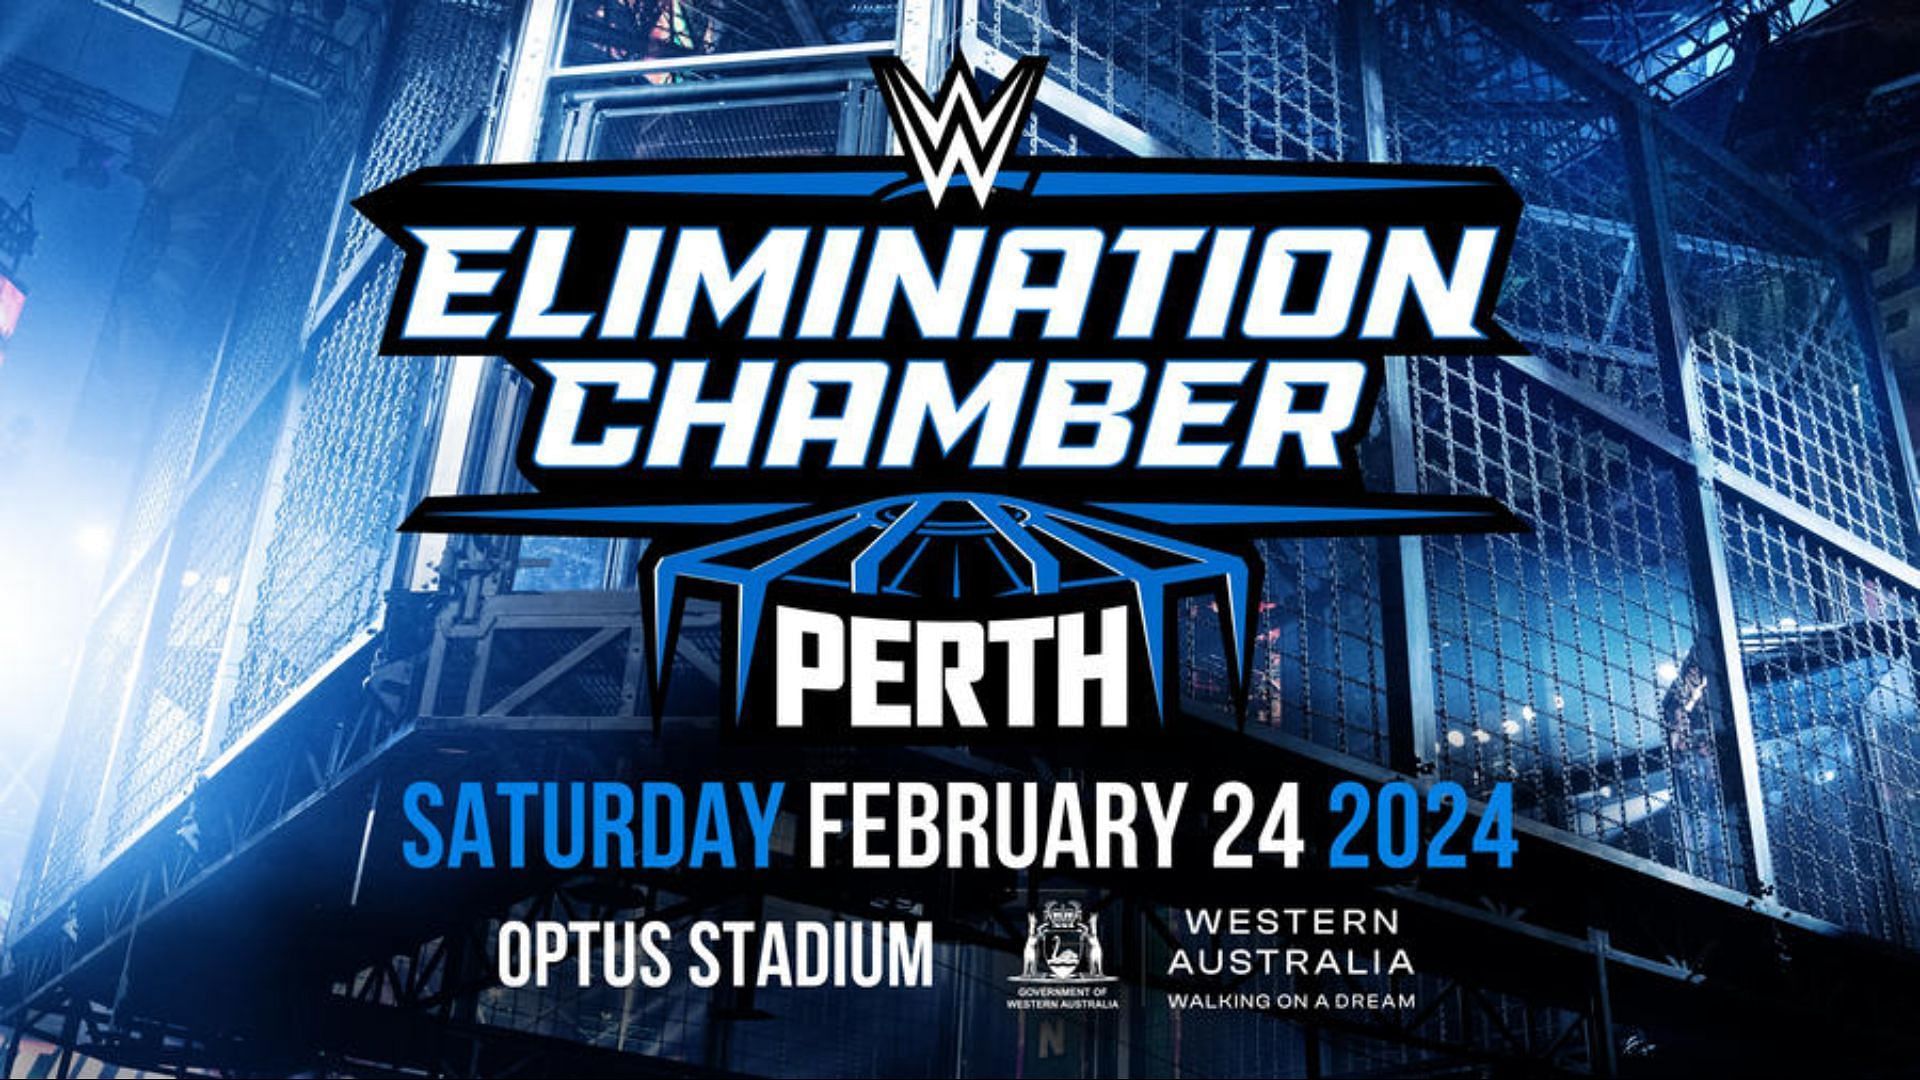 WWE Elimination Chamber: Perth is on February 24th